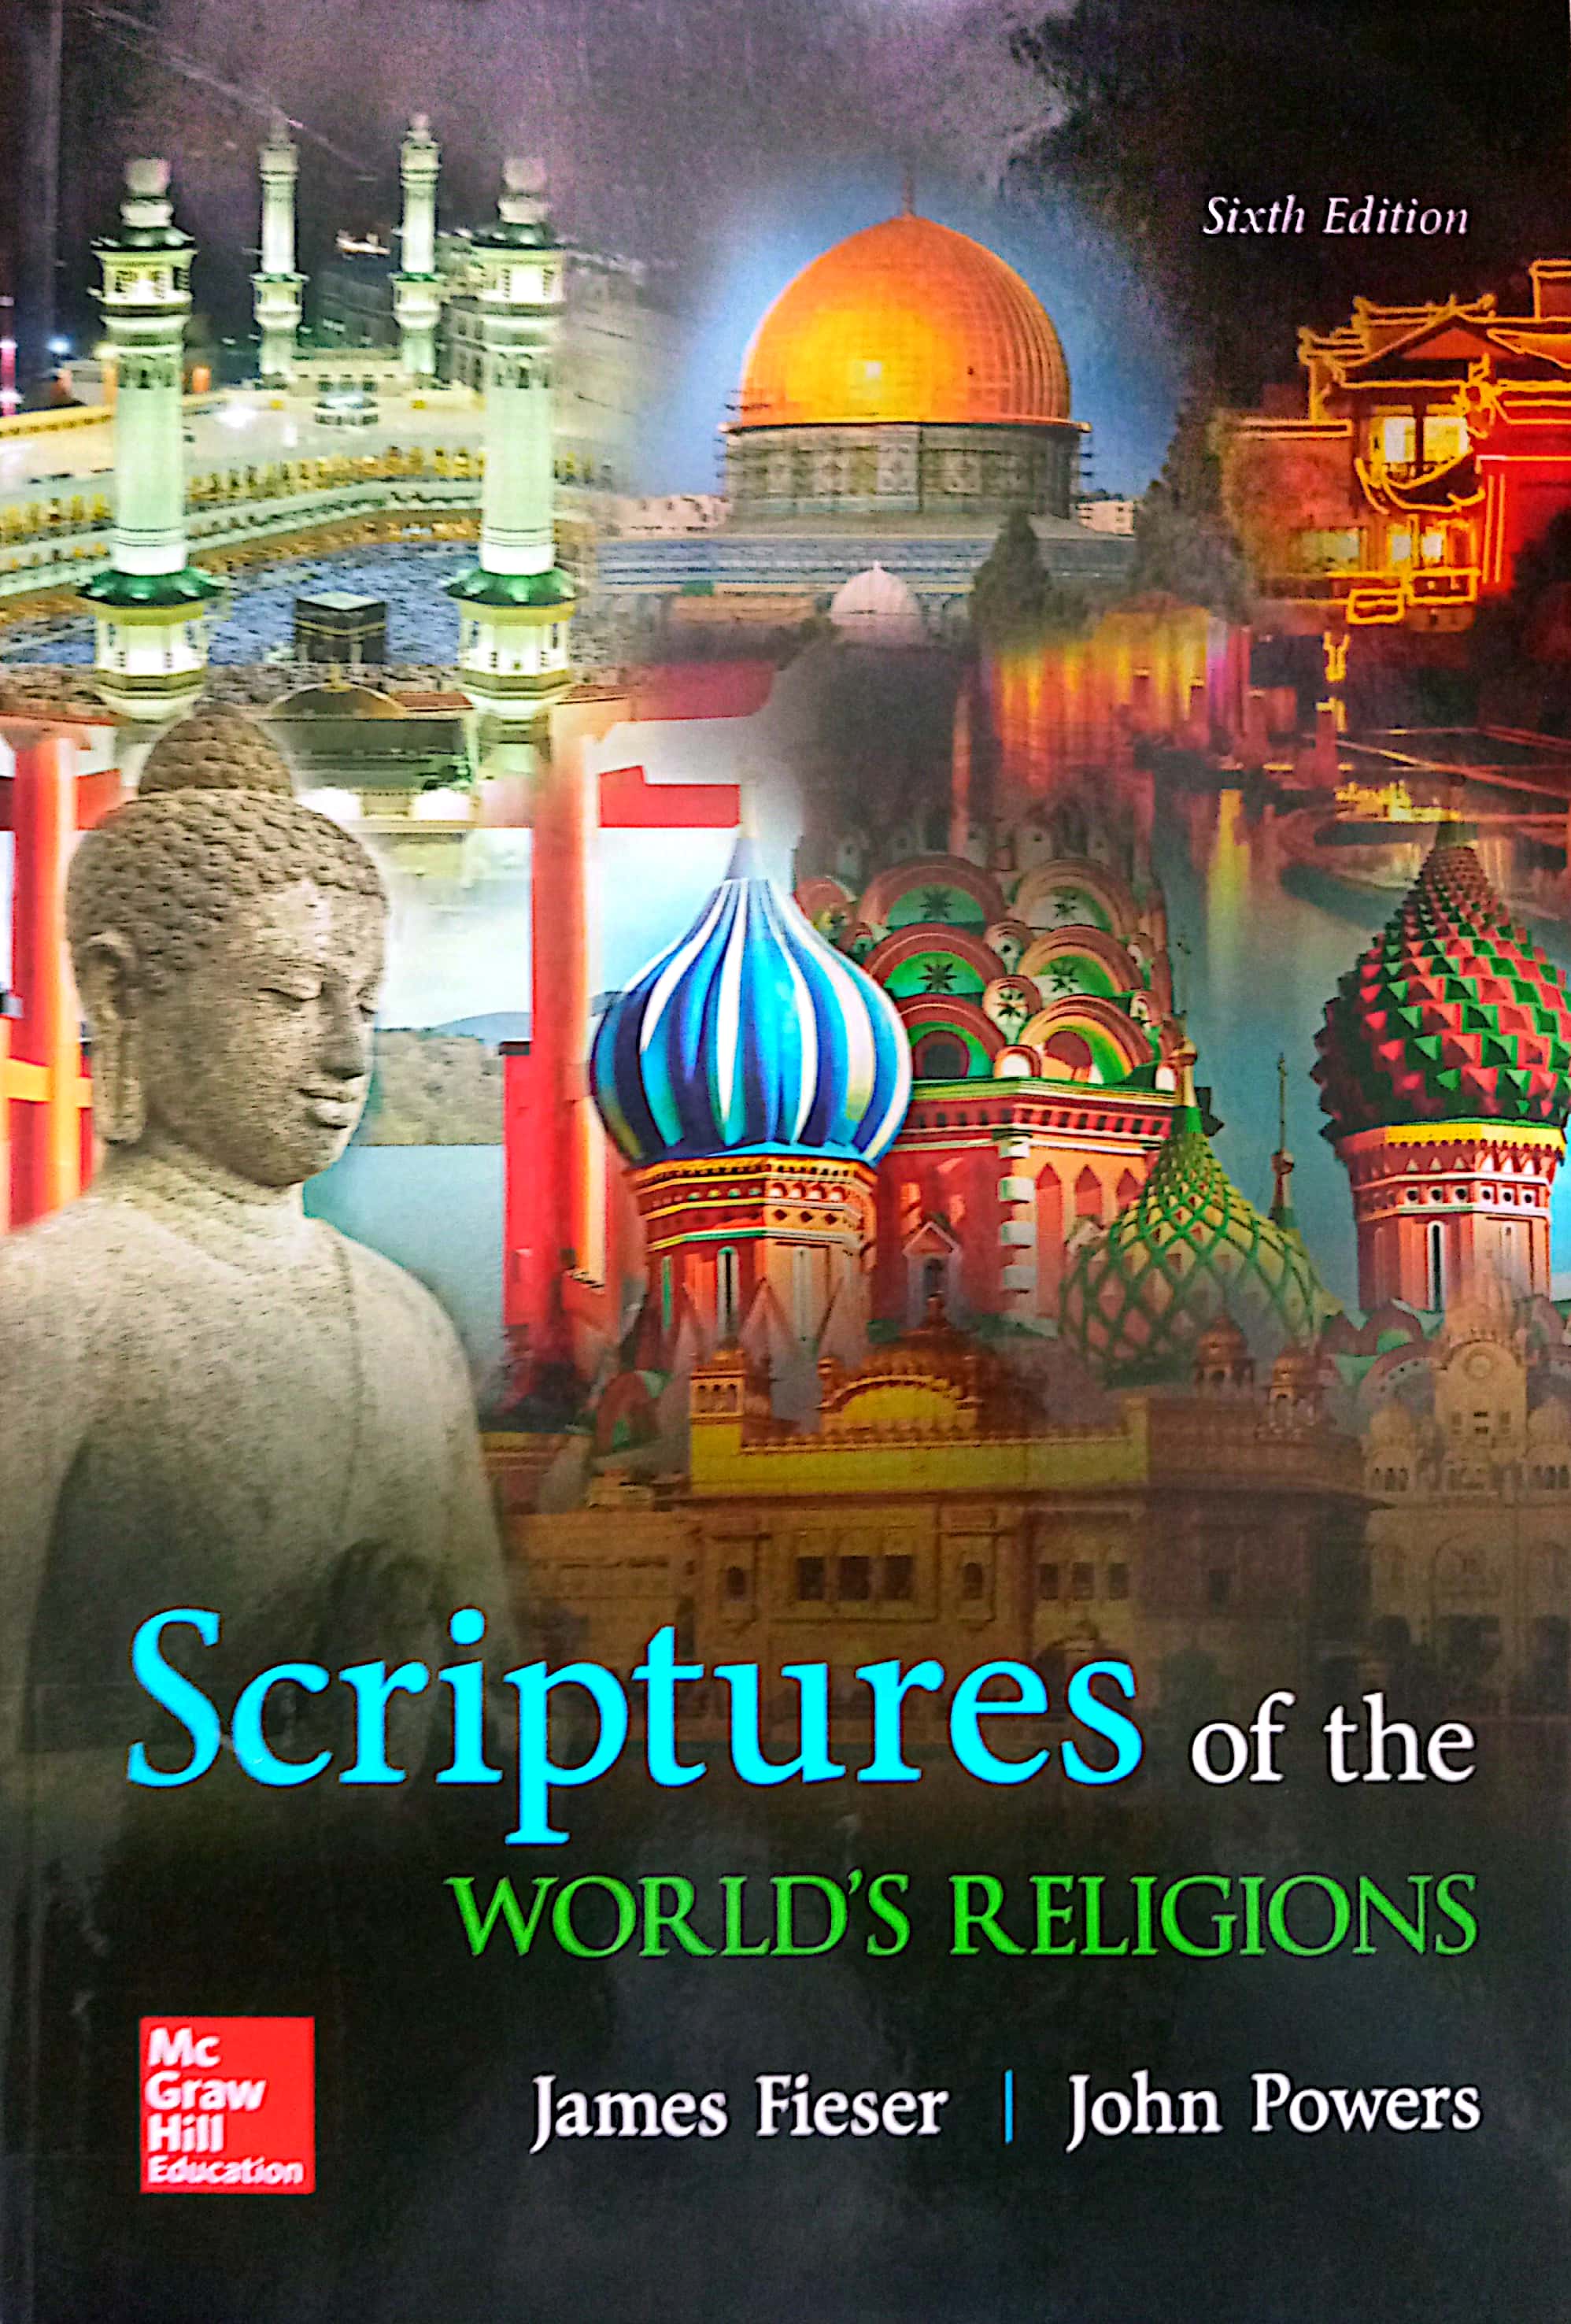 Scriptures of the world's religions